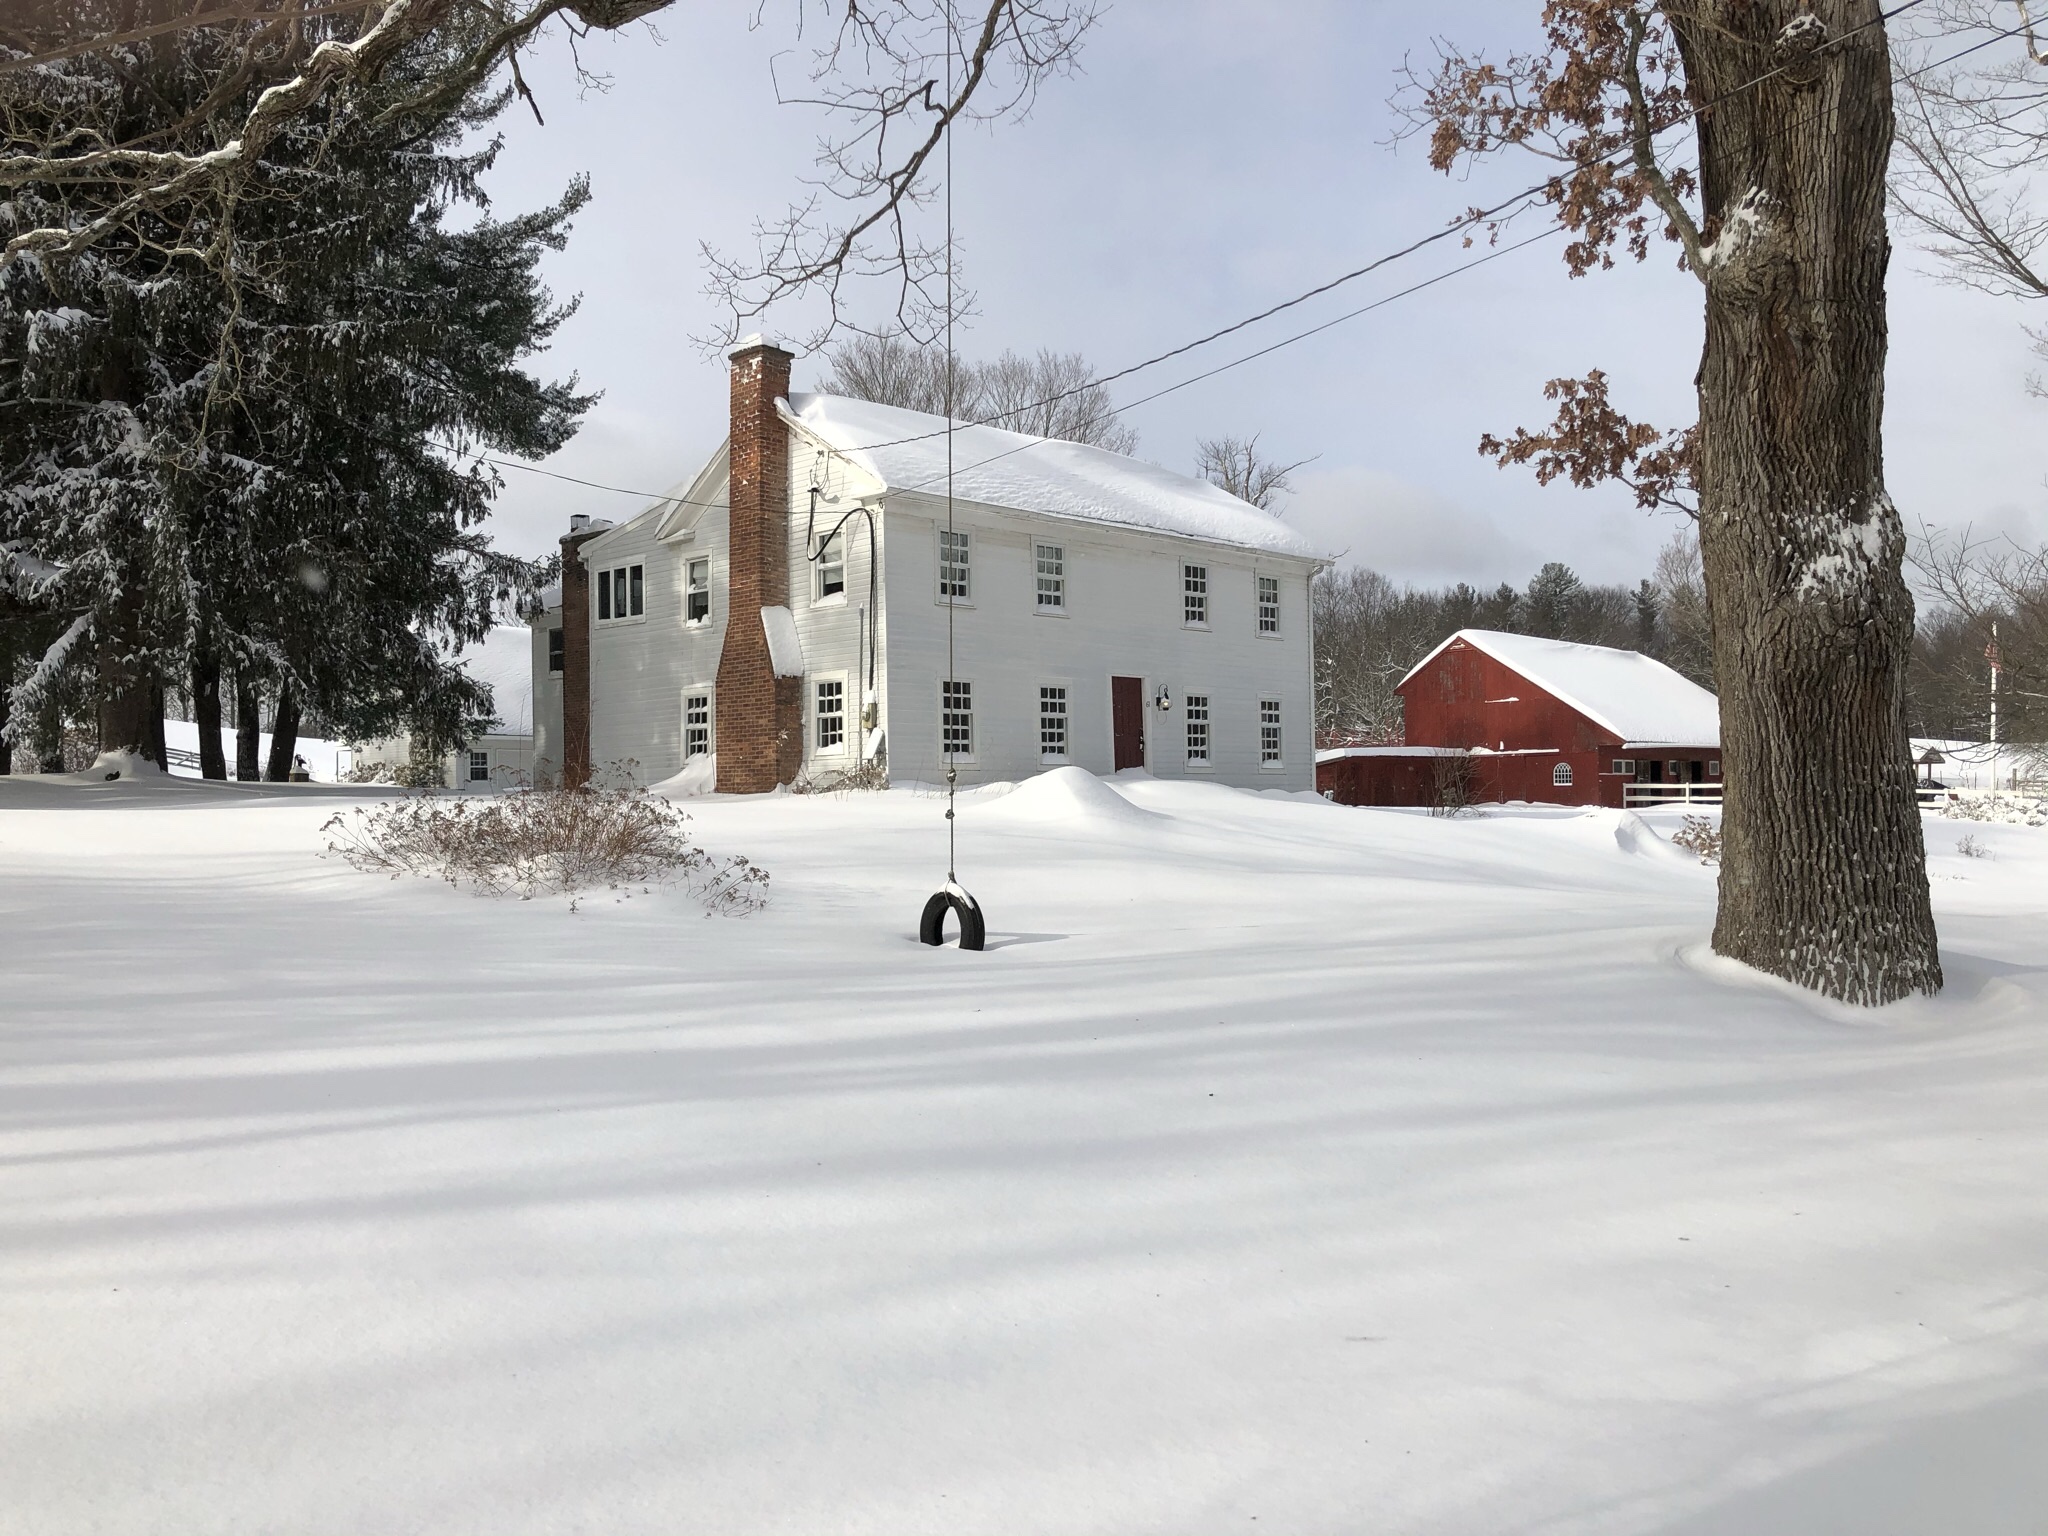 White two story home next to a red barn in front of a snowy yard with a tree and tire swing